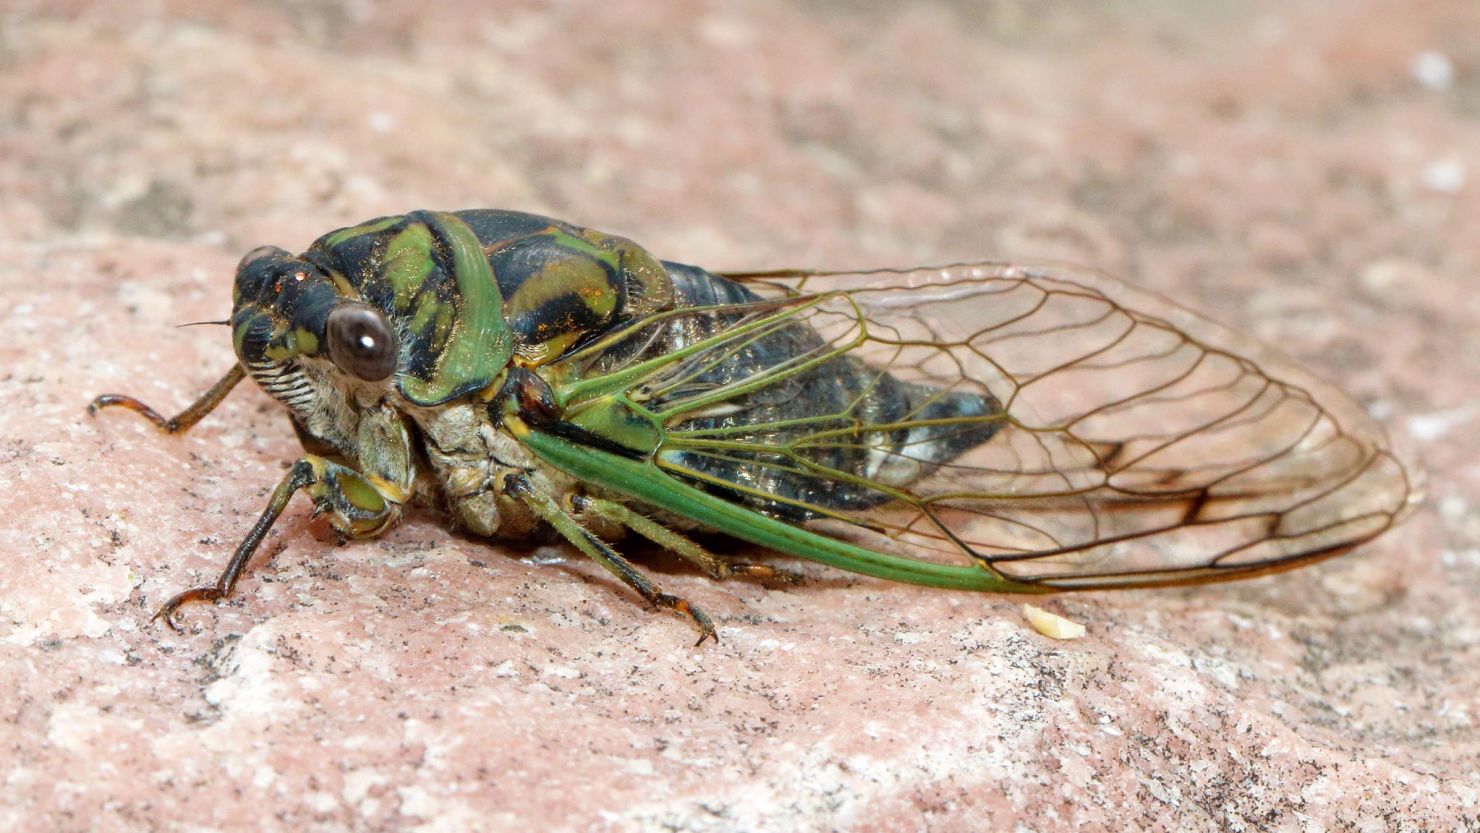 Meet the dog-day cicada, also known as Neotibicen canicularis, a species of annual cicada.